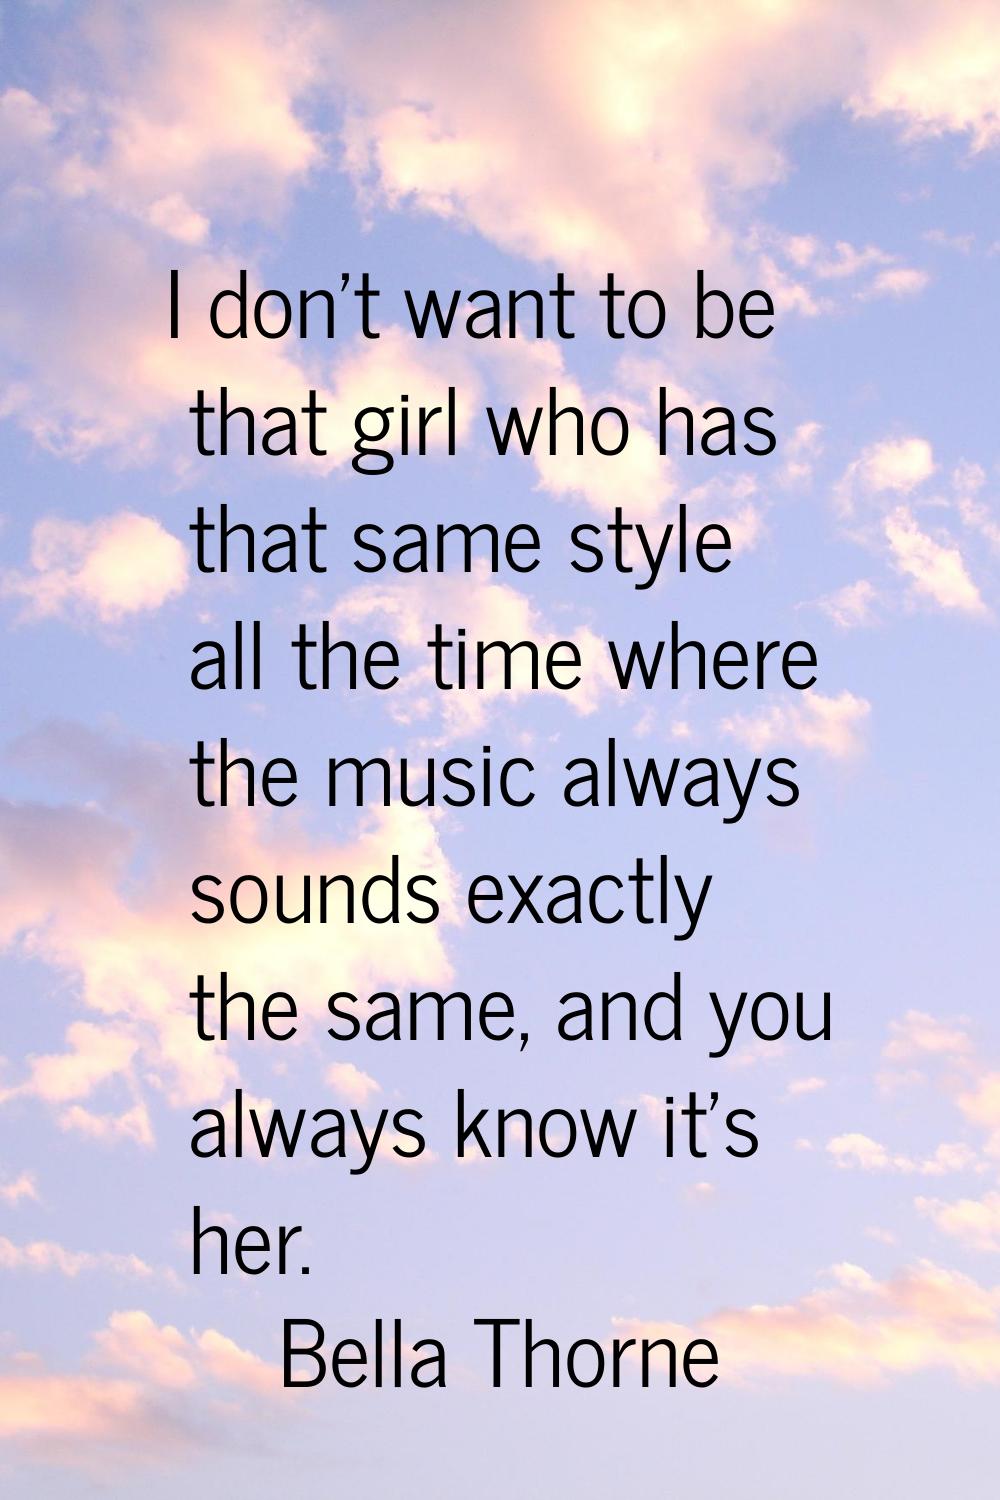 I don't want to be that girl who has that same style all the time where the music always sounds exa